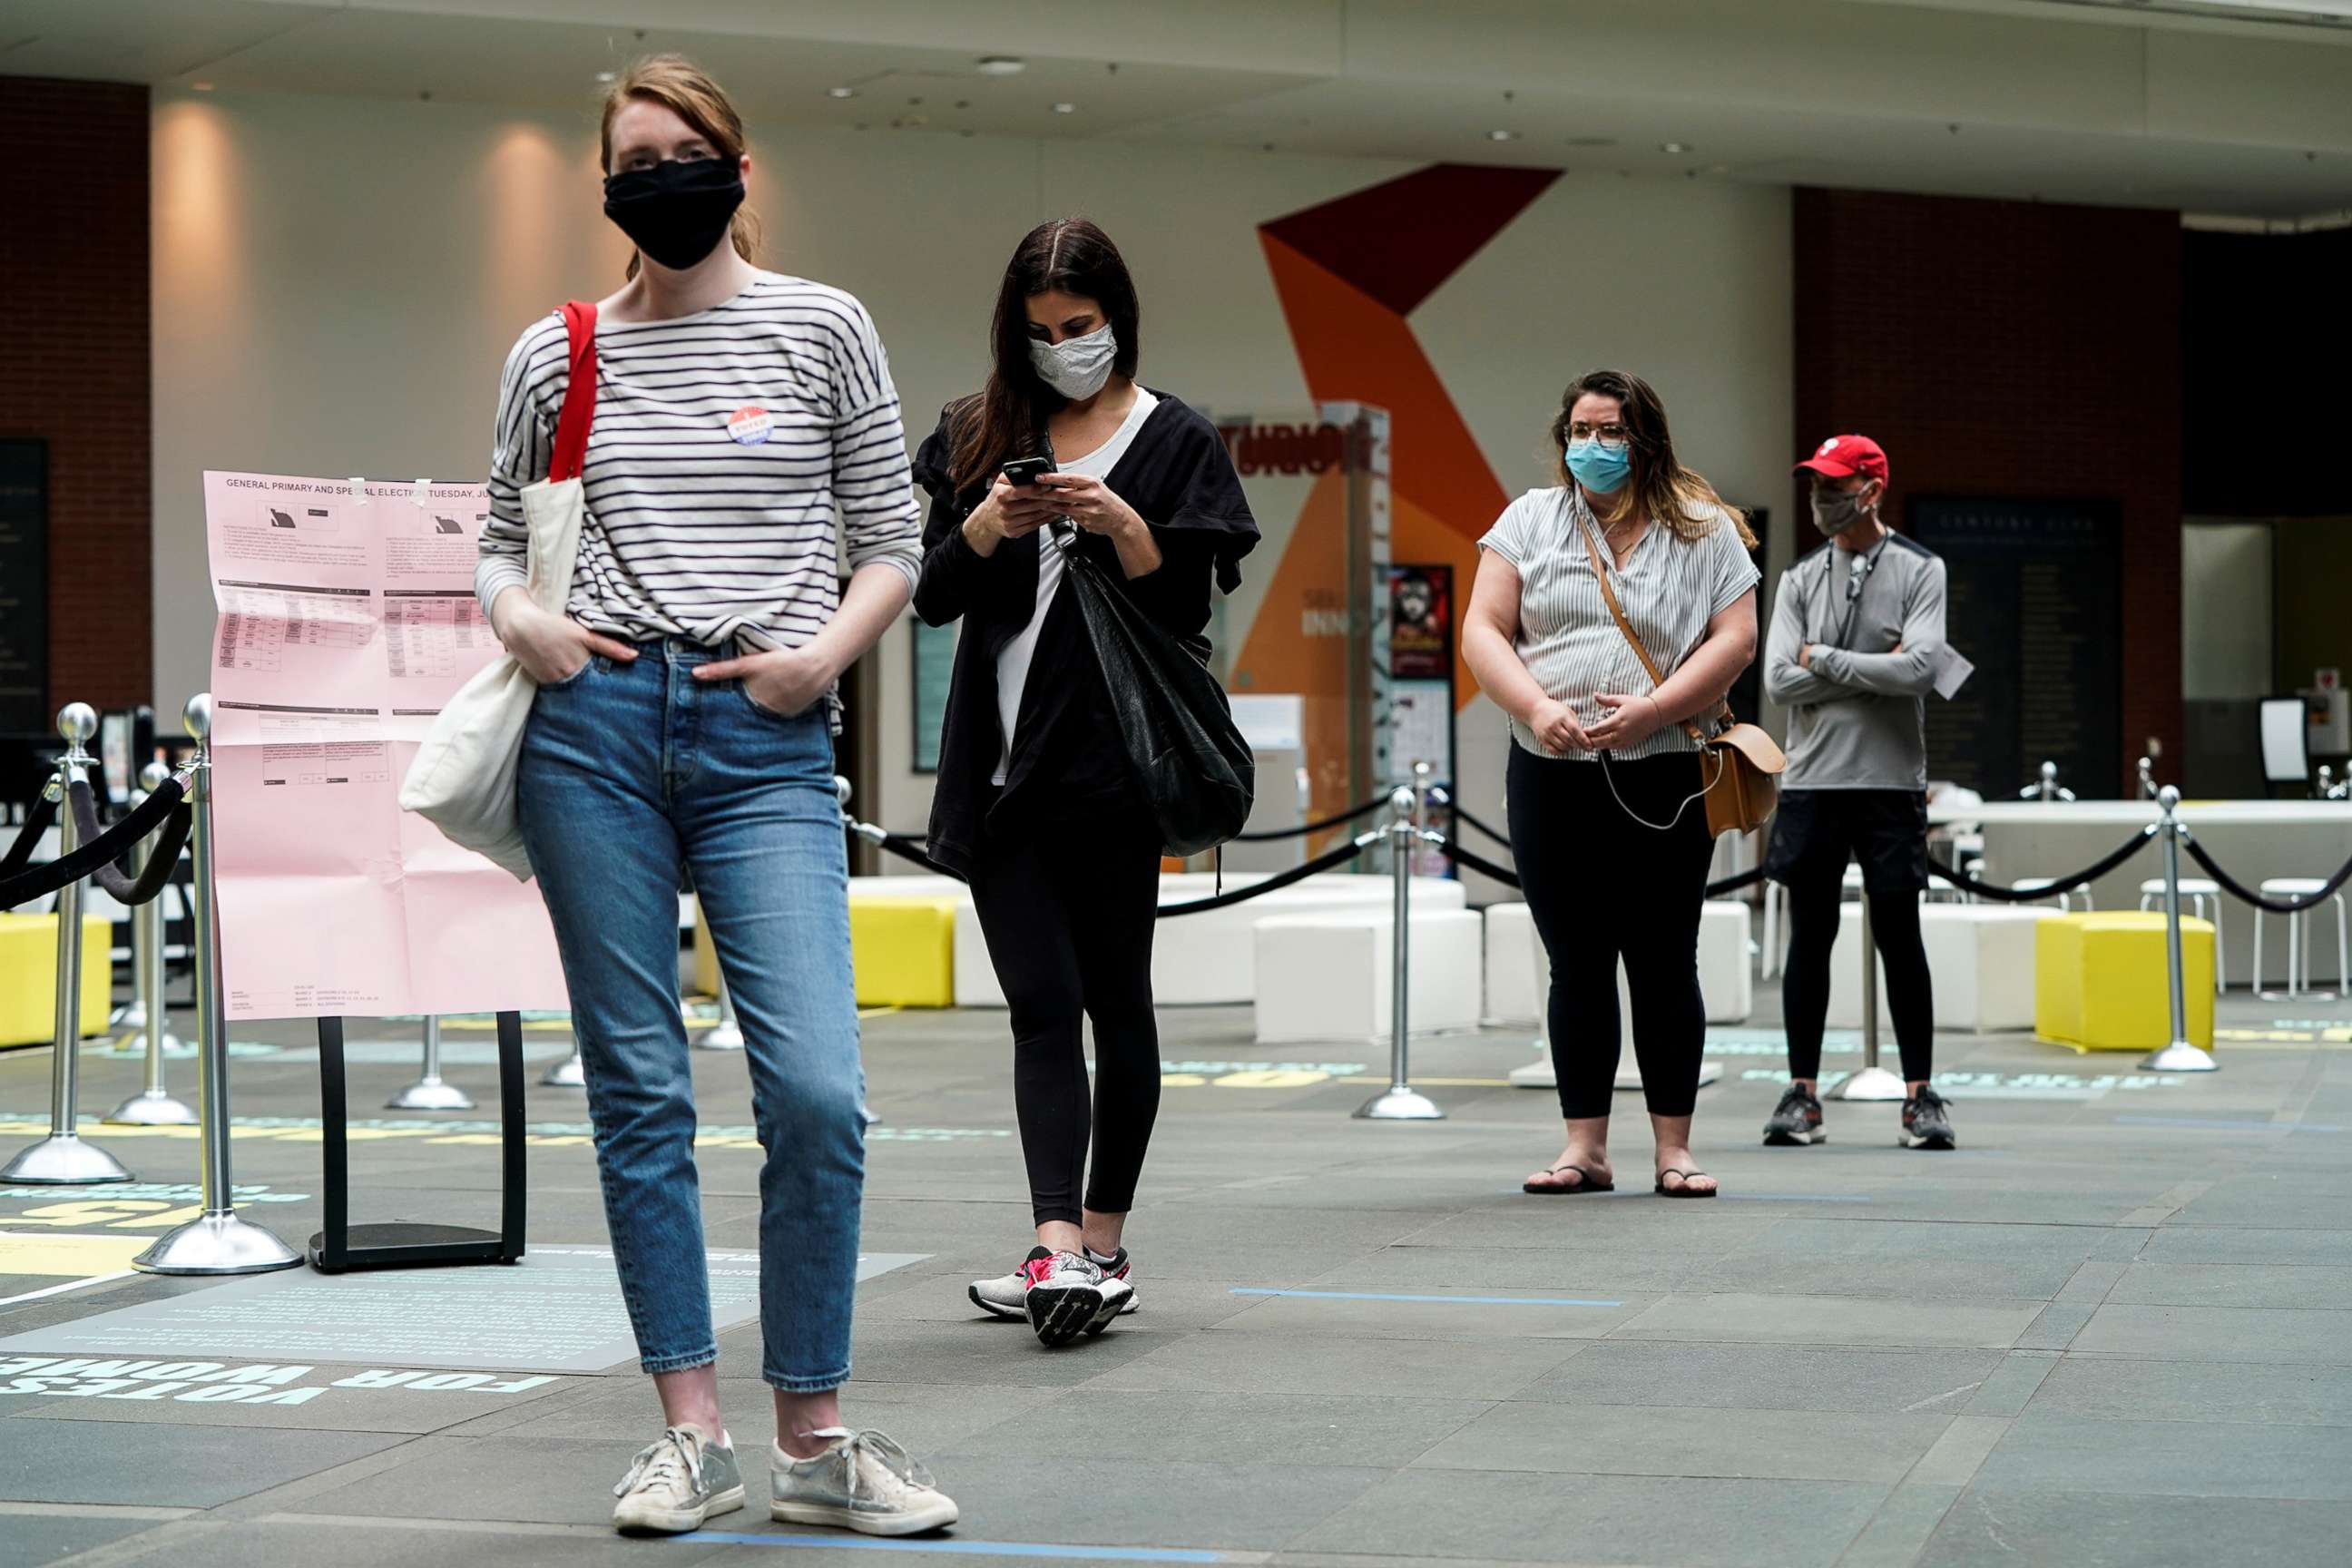 PHOTO: In this June 2, 2020, file photo, people wearing masks to prevent the spread of COVID-19 wait to vote in the primary election in Philadelphia.